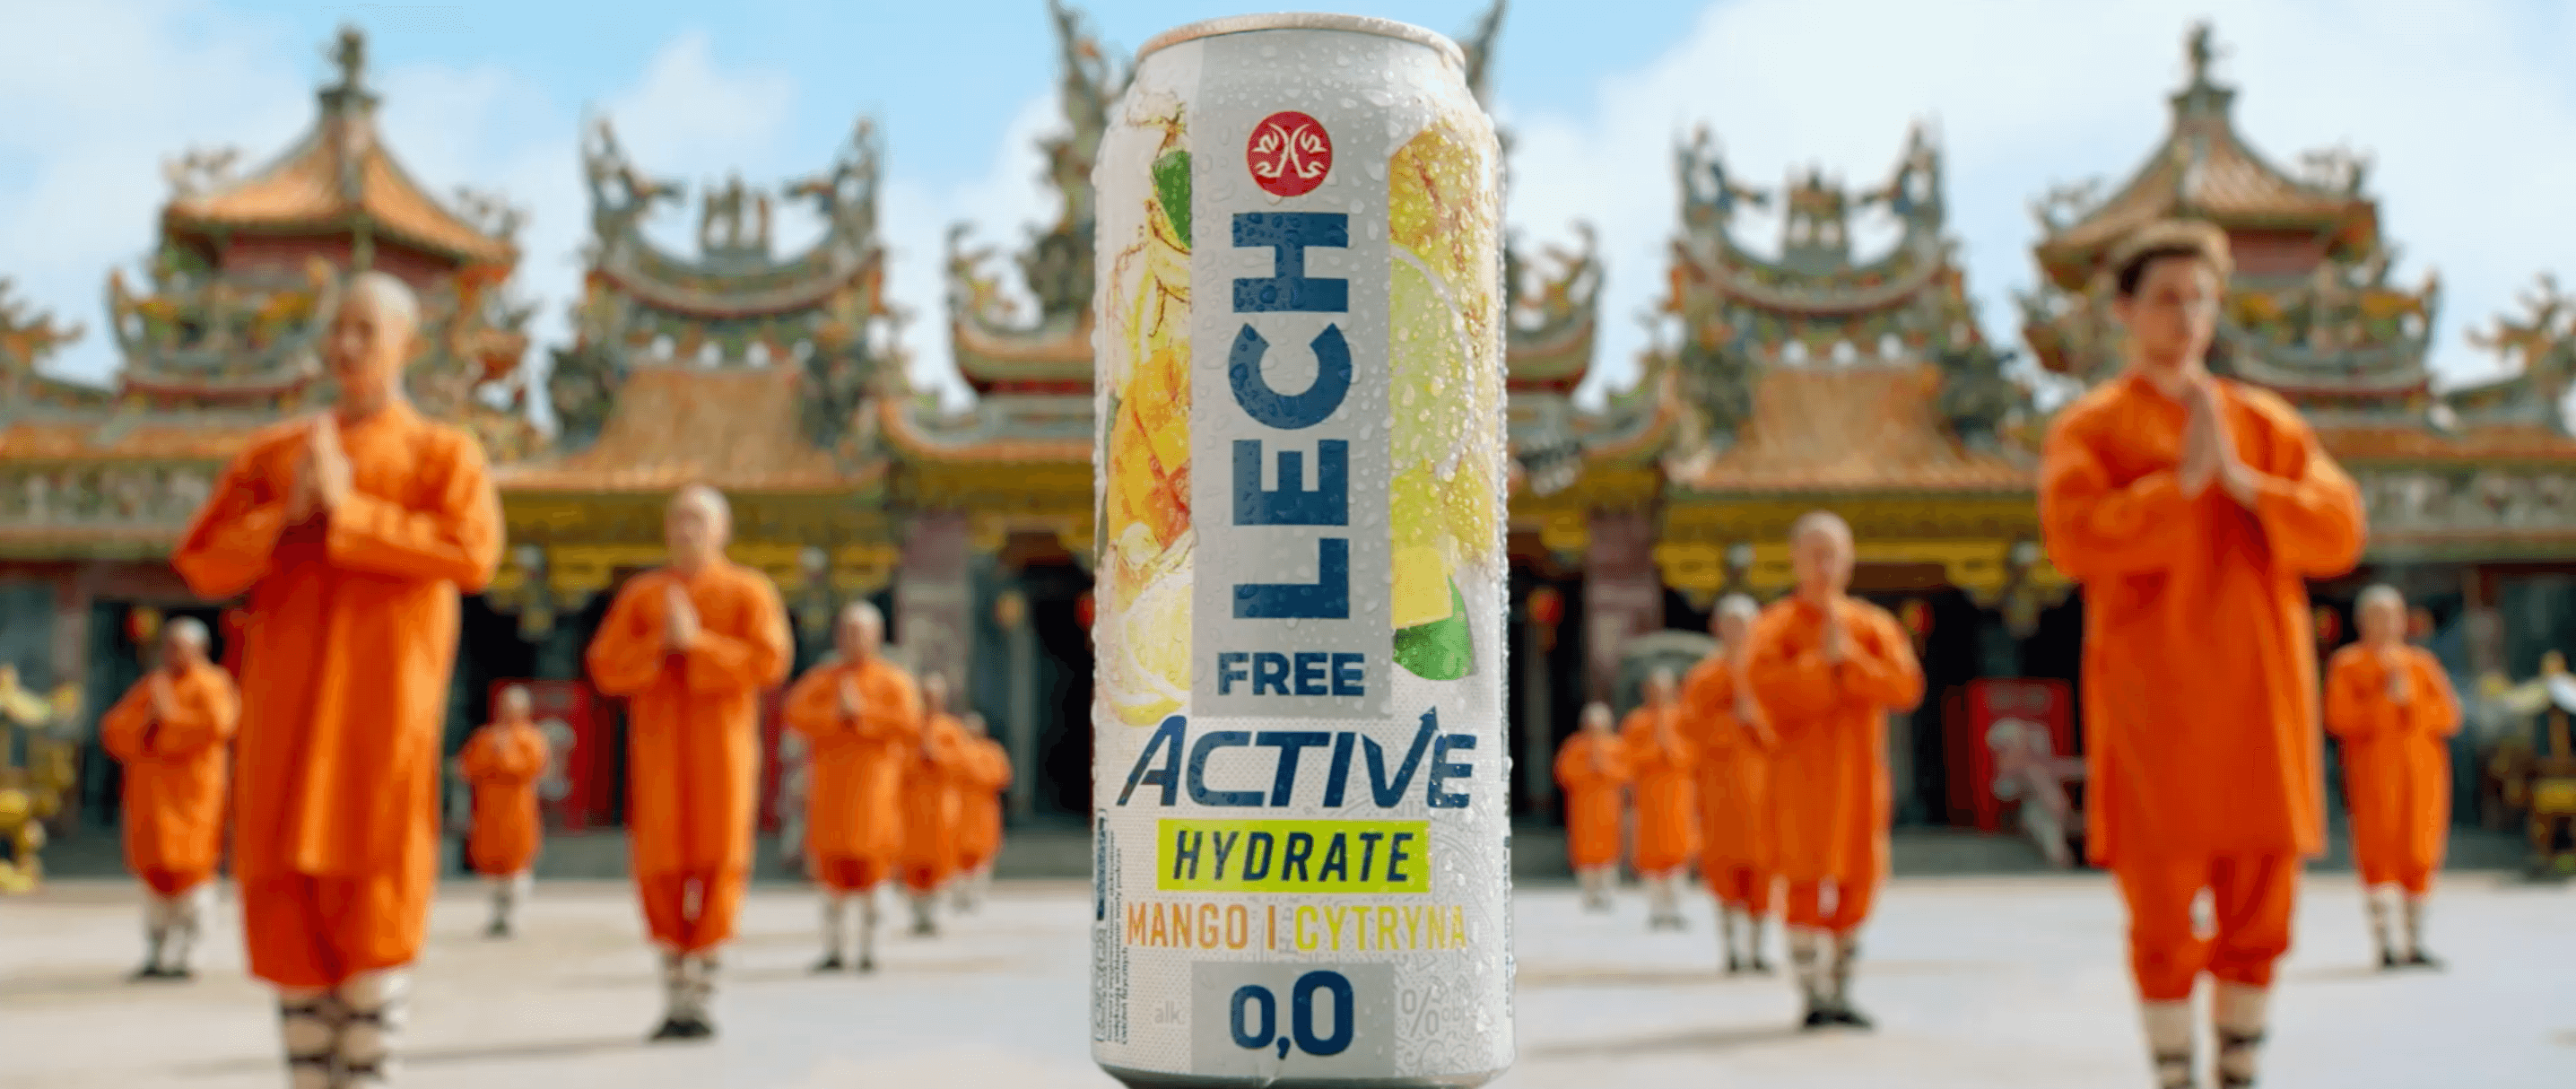 Lech Free 0.0% Active Hydrate – first non-alcoholic beer in Poland with the taste of mango and lemon and hydrating properties launches its new campaign!